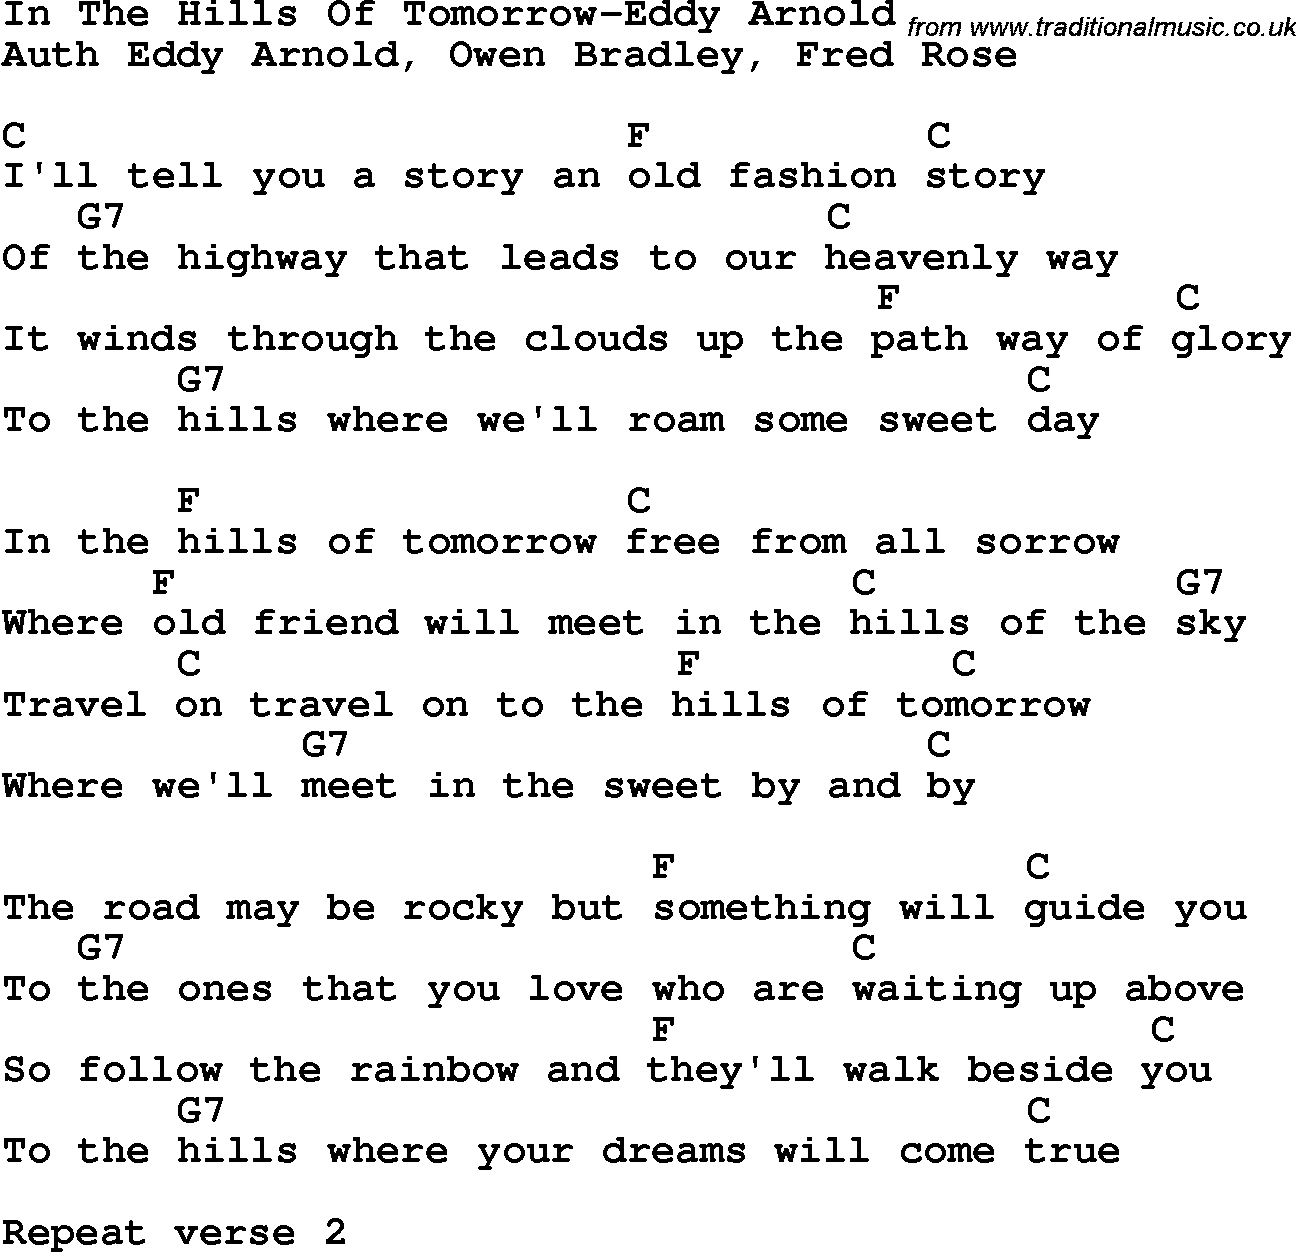 Country, Southern and Bluegrass Gospel Song In The Hills Of Tomorrow-Eddy Arnold lyrics and chords